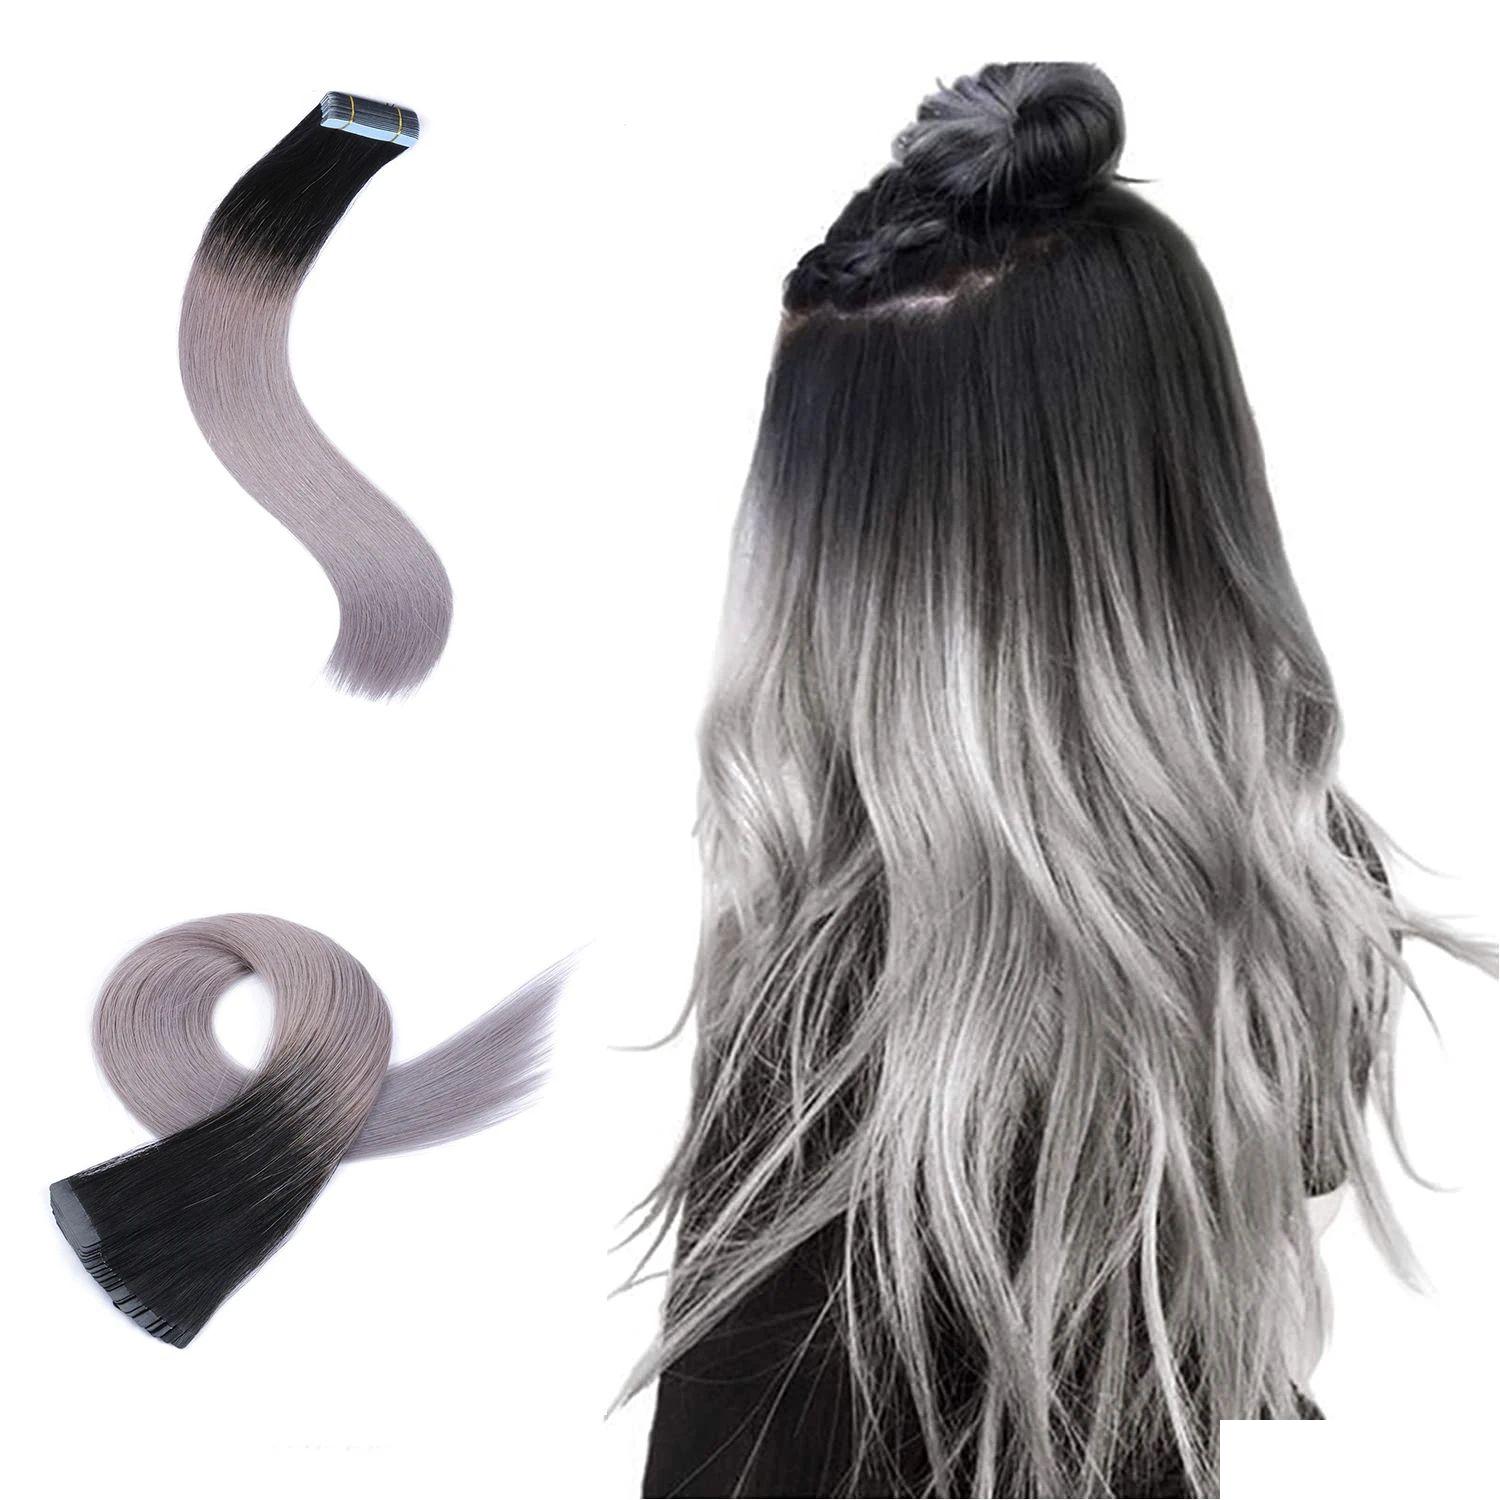 Hair Extension Kits Extensions Ombre Ash Blonde Natural Tape In Humanhair Skin Weft Adhesive Invisible Real Straight For Black Drop Dhmml